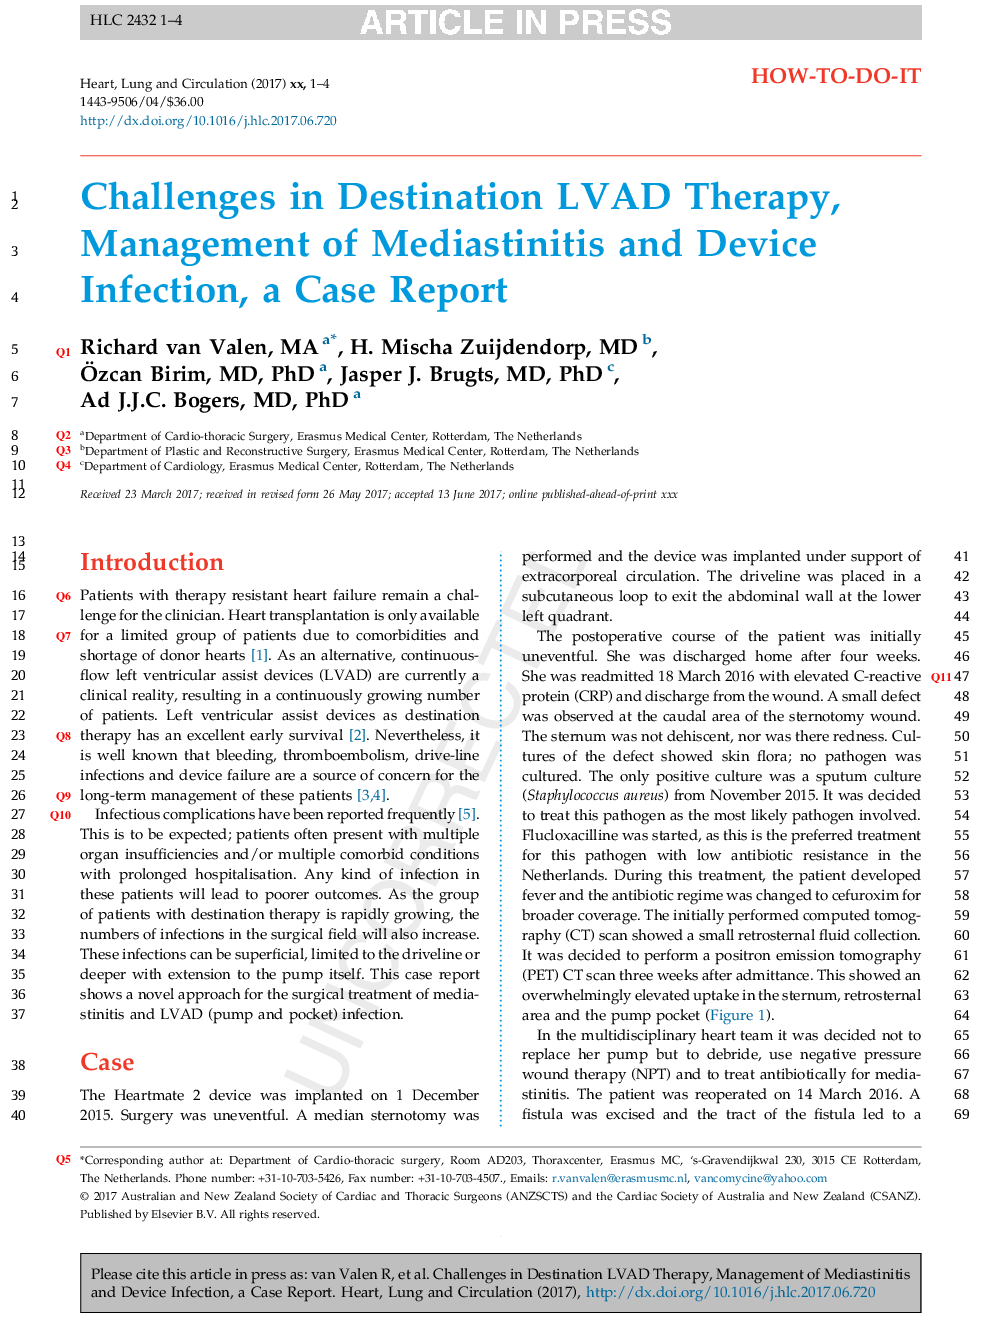 Challenges in Destination LVAD Therapy, Management of Mediastinitis and Device Infection, a Case Report